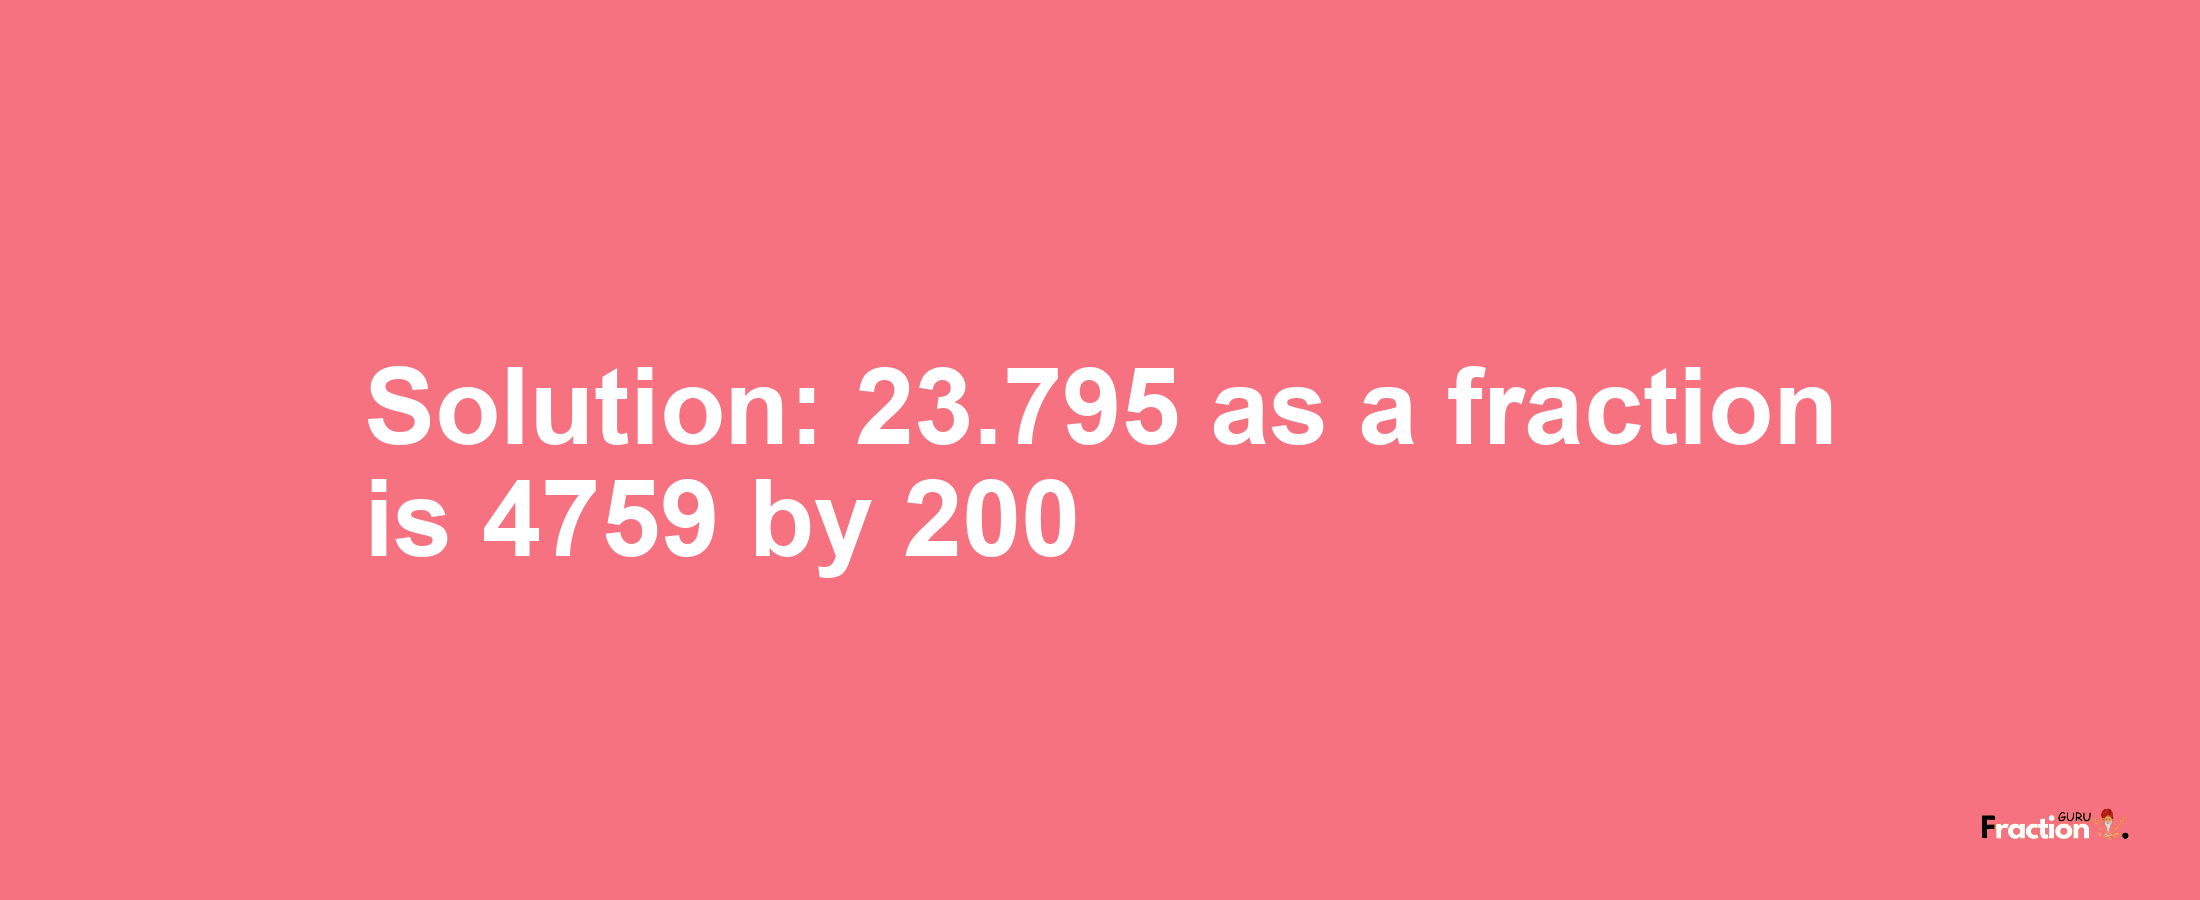 Solution:23.795 as a fraction is 4759/200